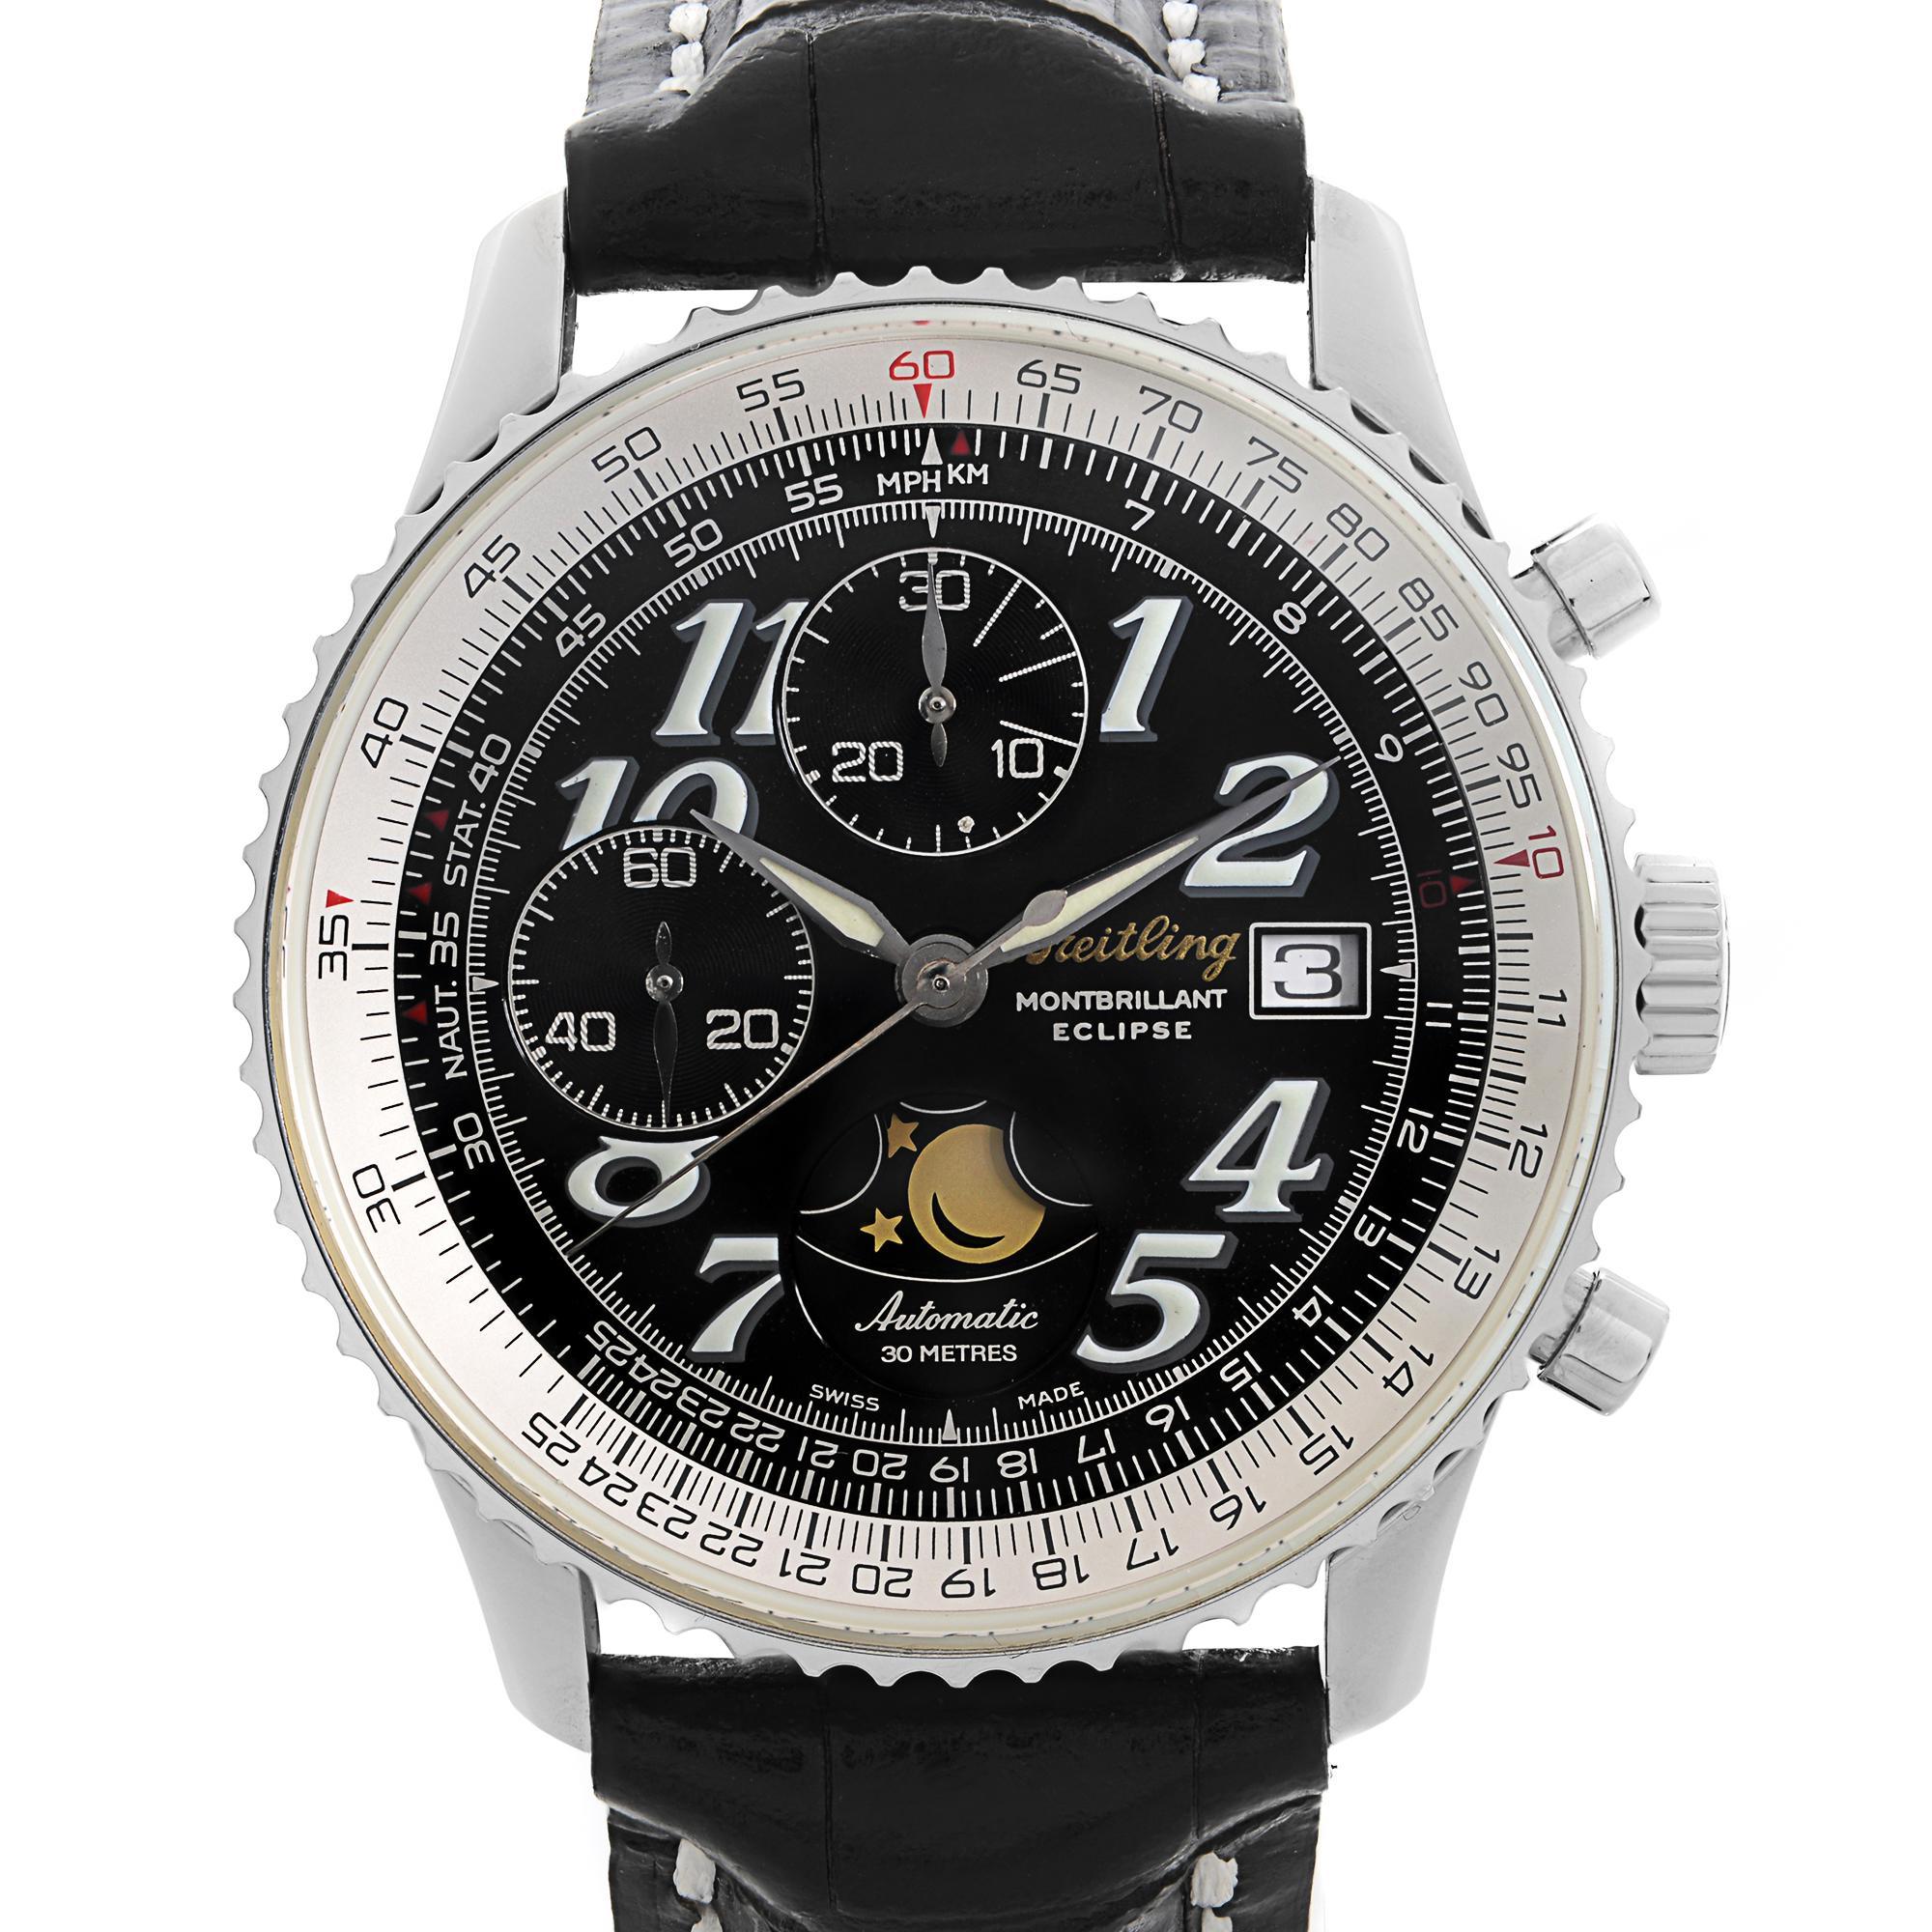 Pre-Owned Breitling Montbrillant Eclipse Steel Black Dial Automatic Men's Watch A43030. Comes with a custom non Breitling leather strap. Has some patina on dial. This Beautiful Men's Timepiece is Powered by an Mechanical (Automatic) Movement and